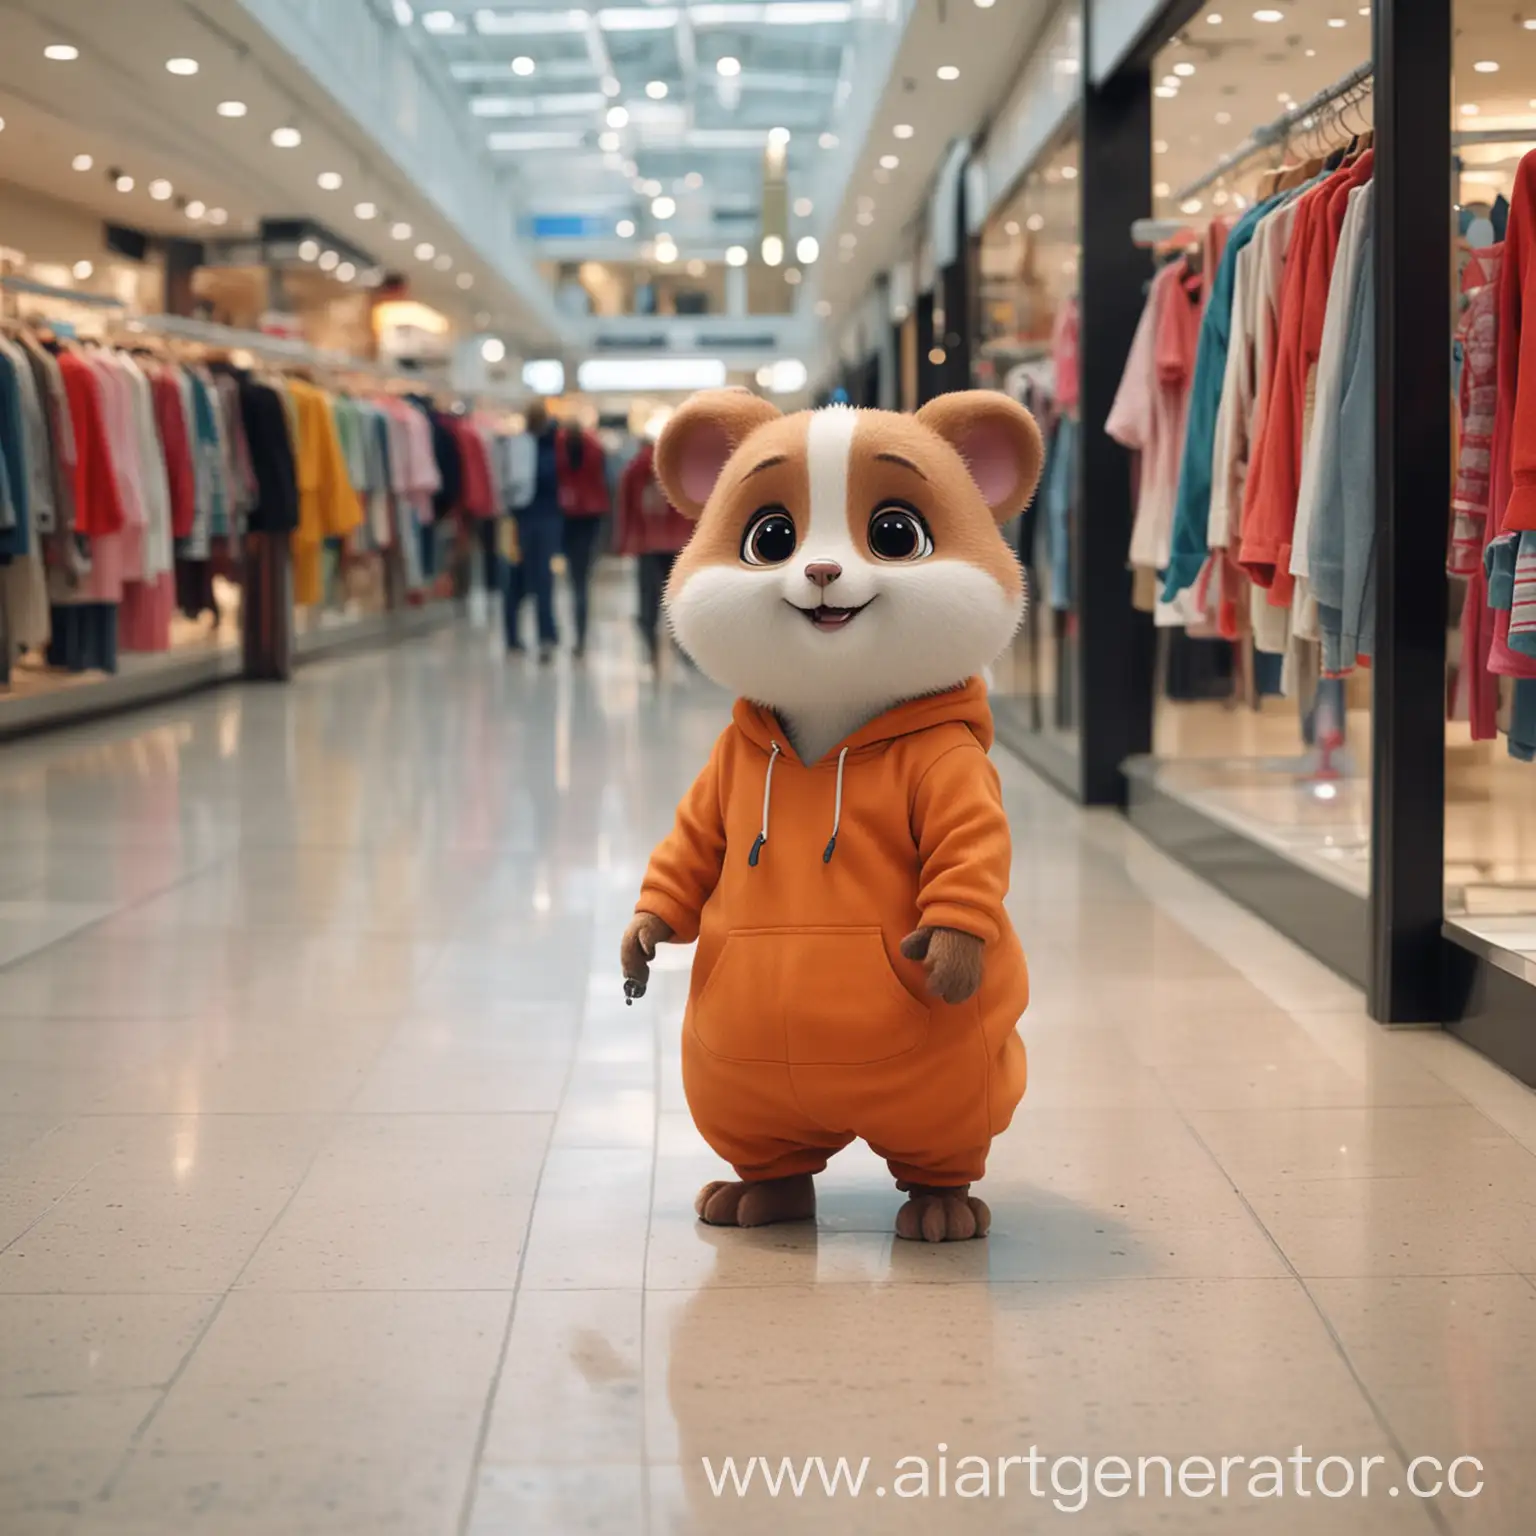 Funny-Cute-Animal-Shopping-for-Clothes-in-a-Vibrant-Mall-Scene